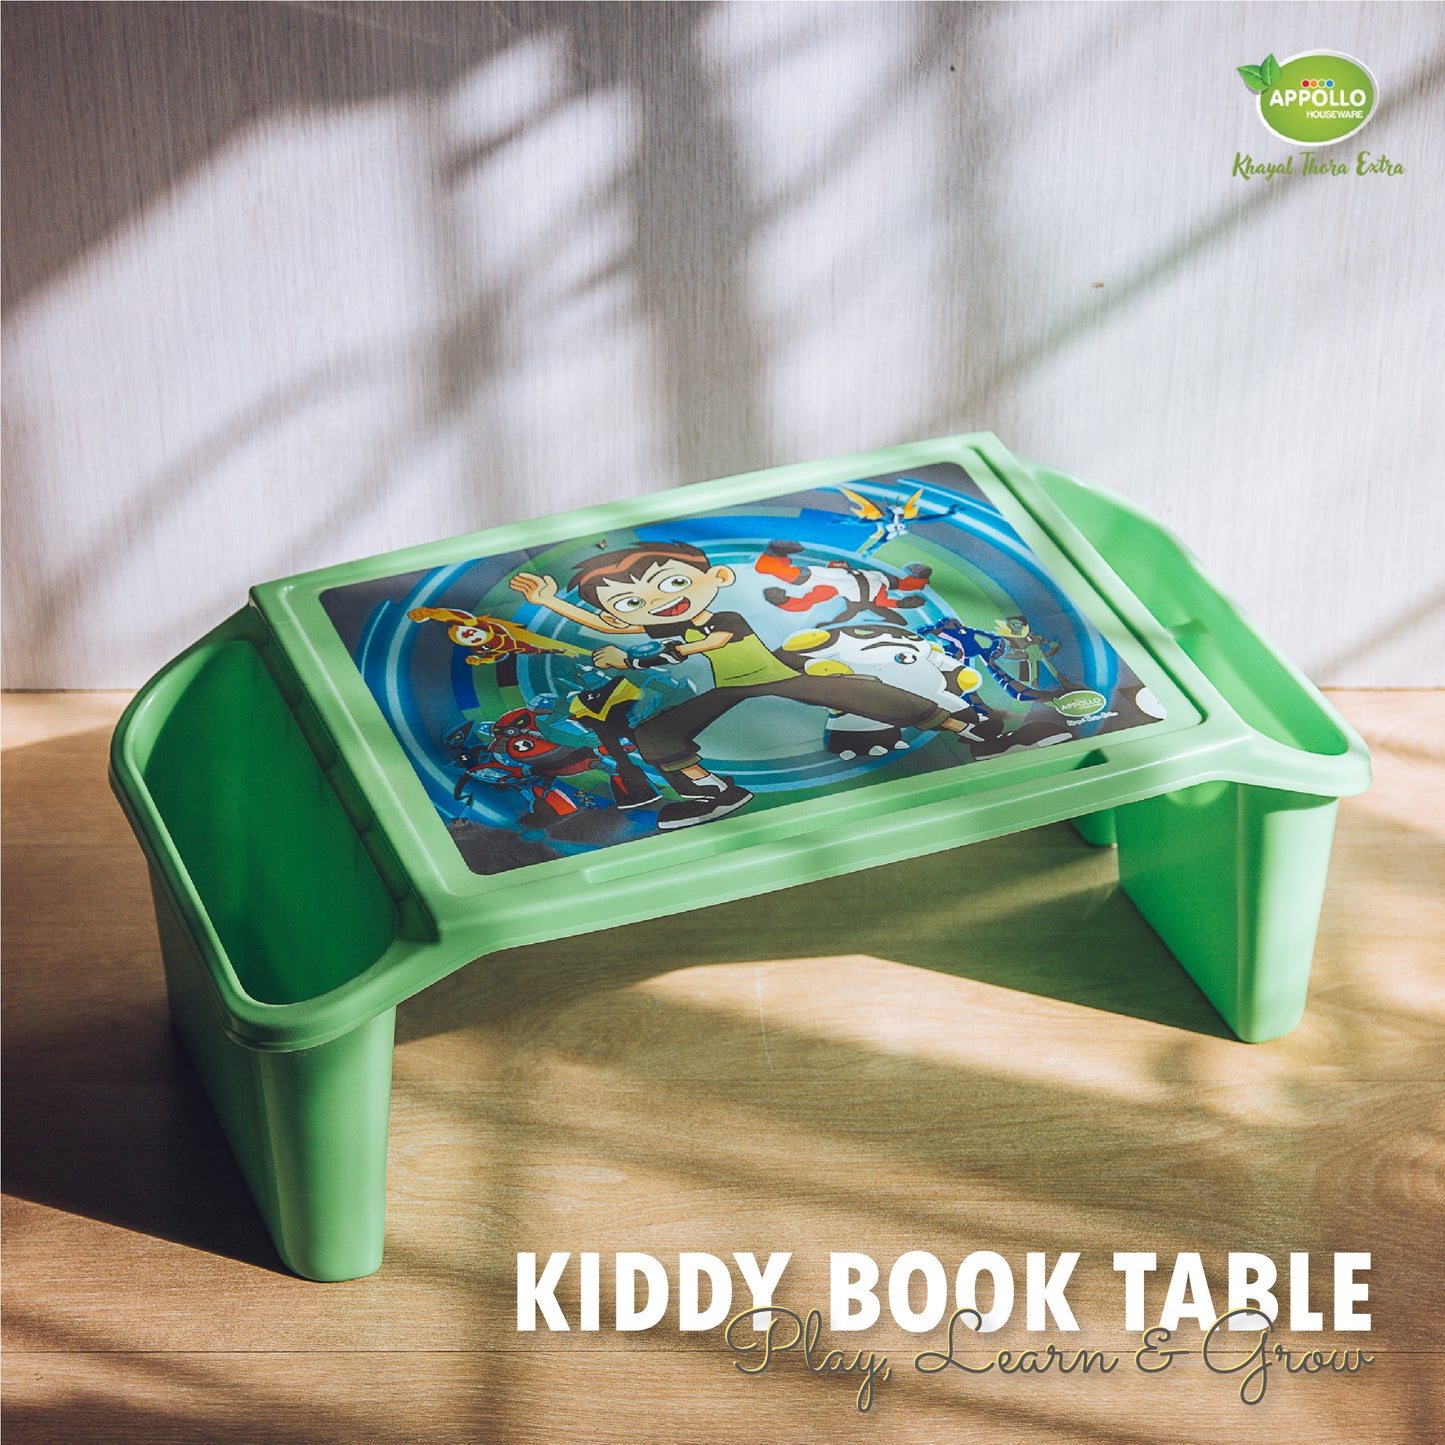 Kiddy Book Table with sticker